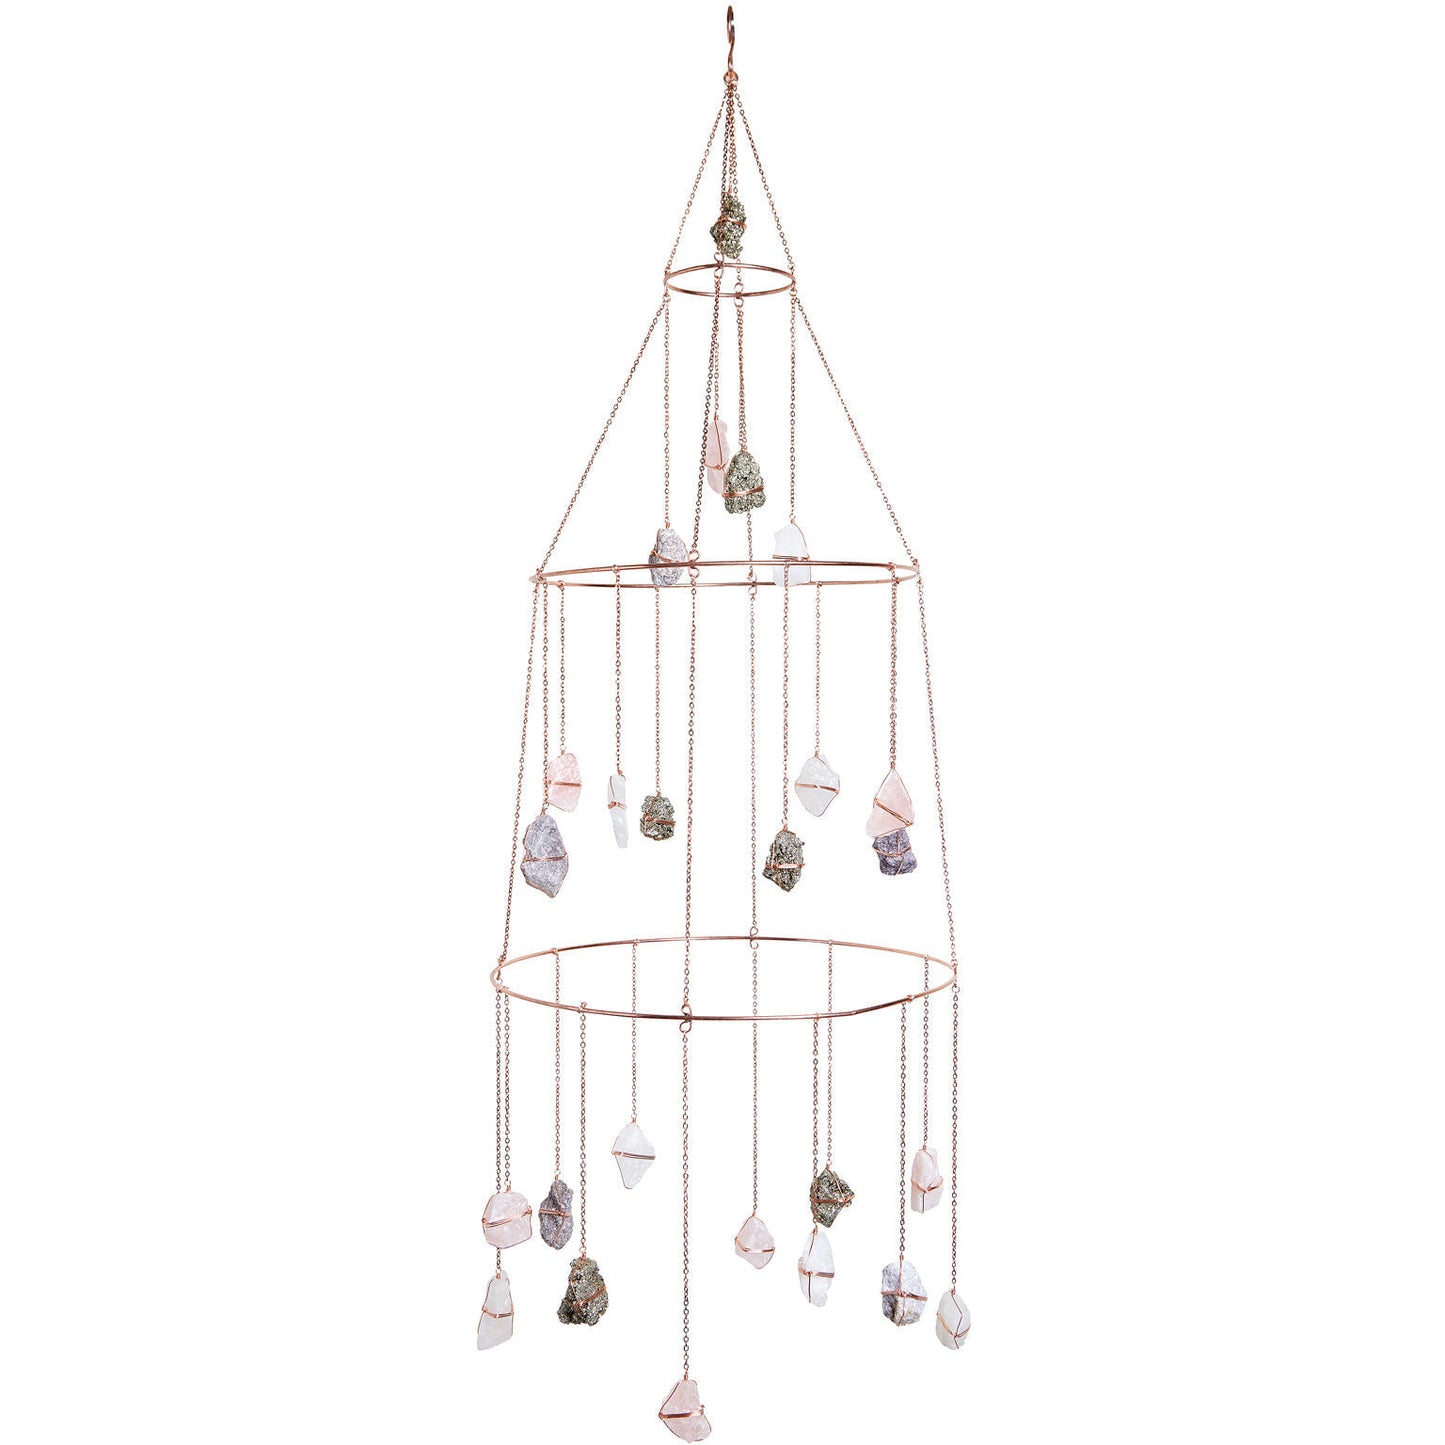 Ethereal Mixed Healing Crystal Chandelier by Ariana Ost